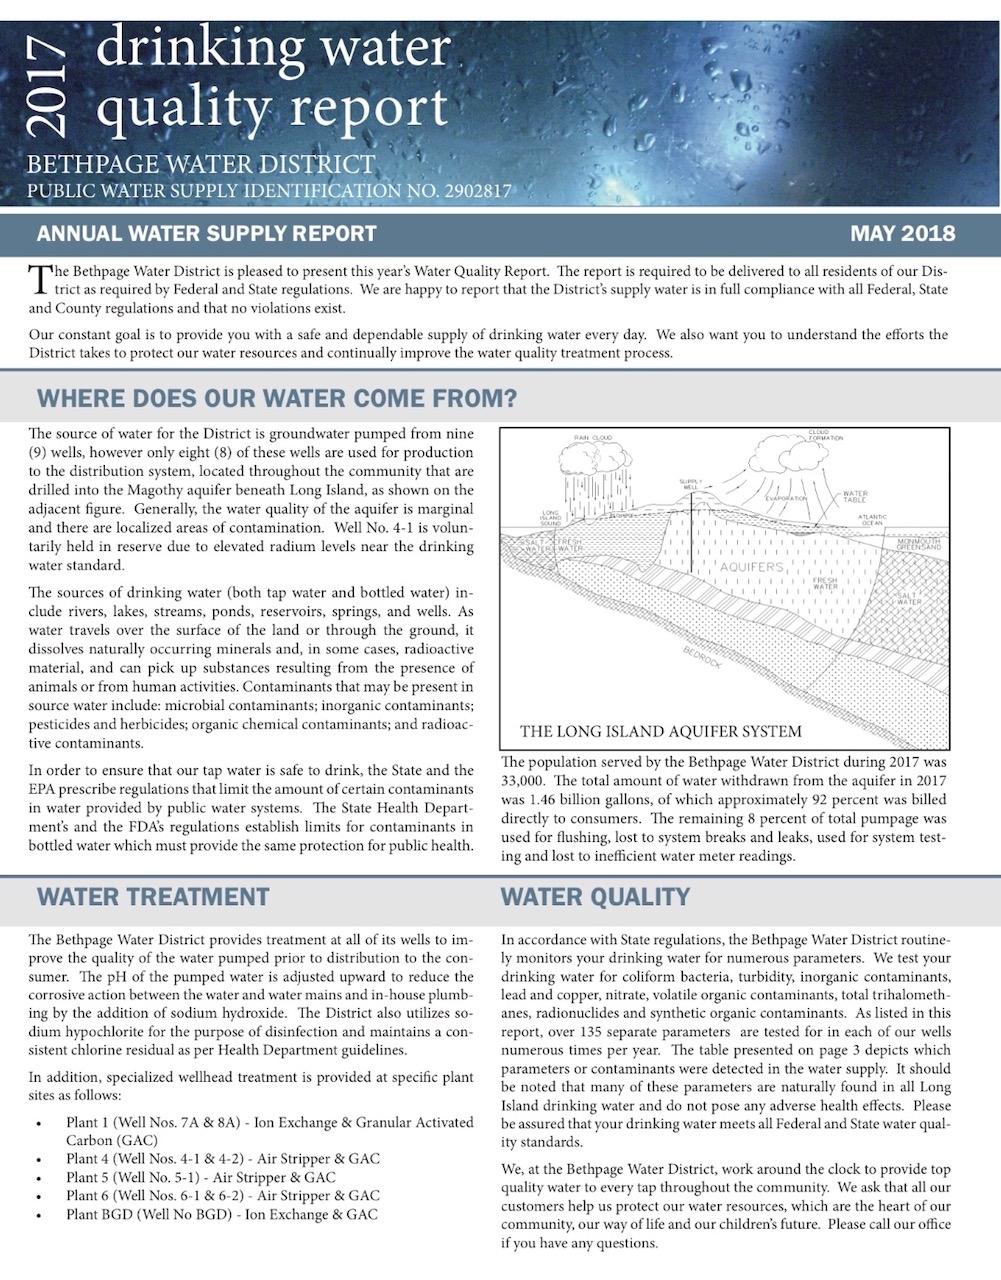 2017 Water Quality Report